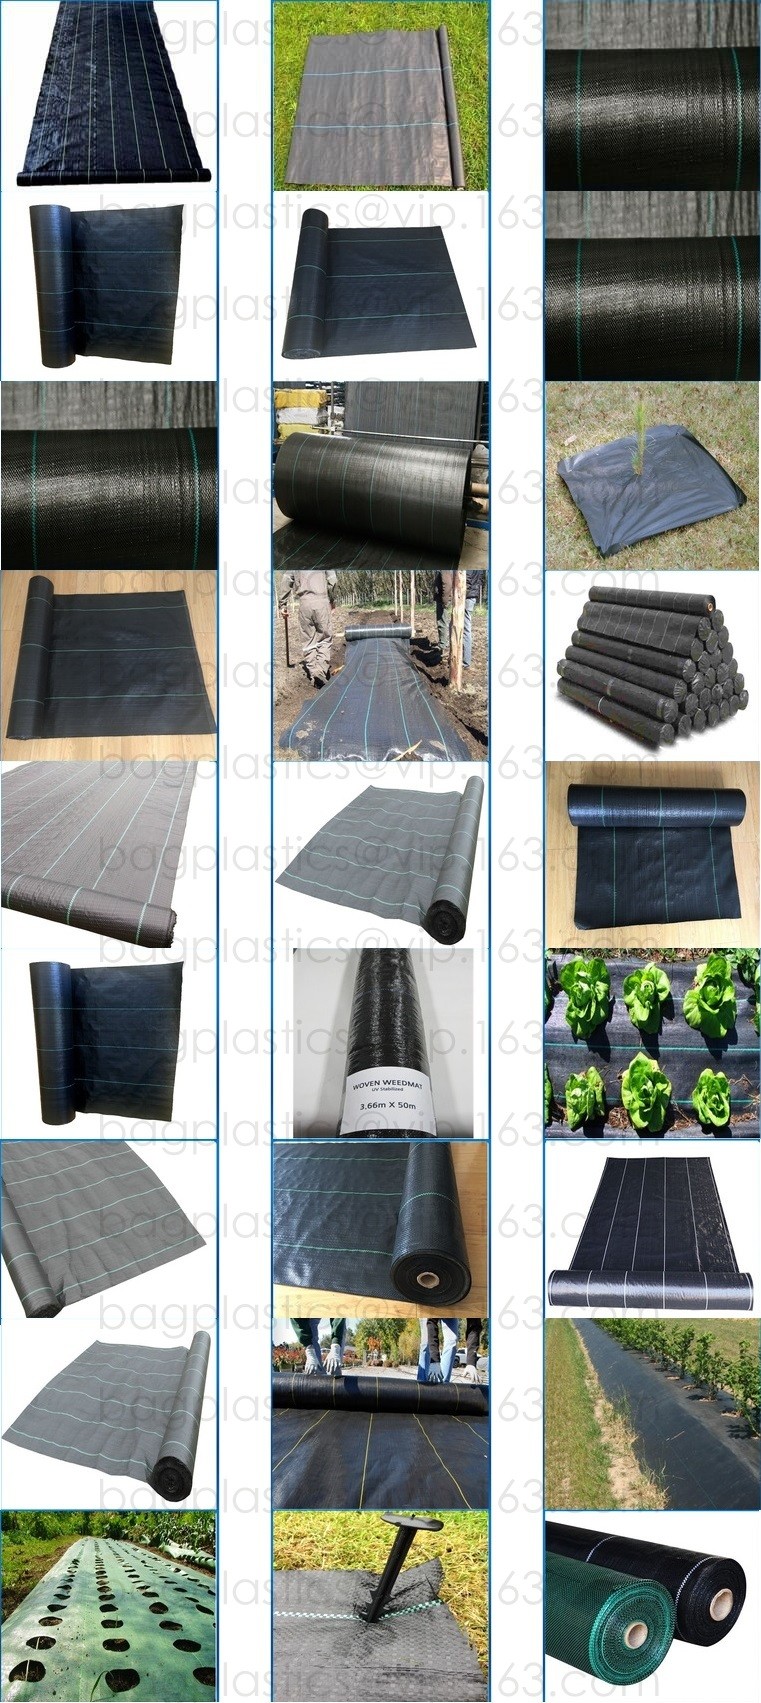 Supply heavy duty 100% virgin anti grass weed barrier/garden weed barrier cloth/agricultural ground cover mesh with UV r